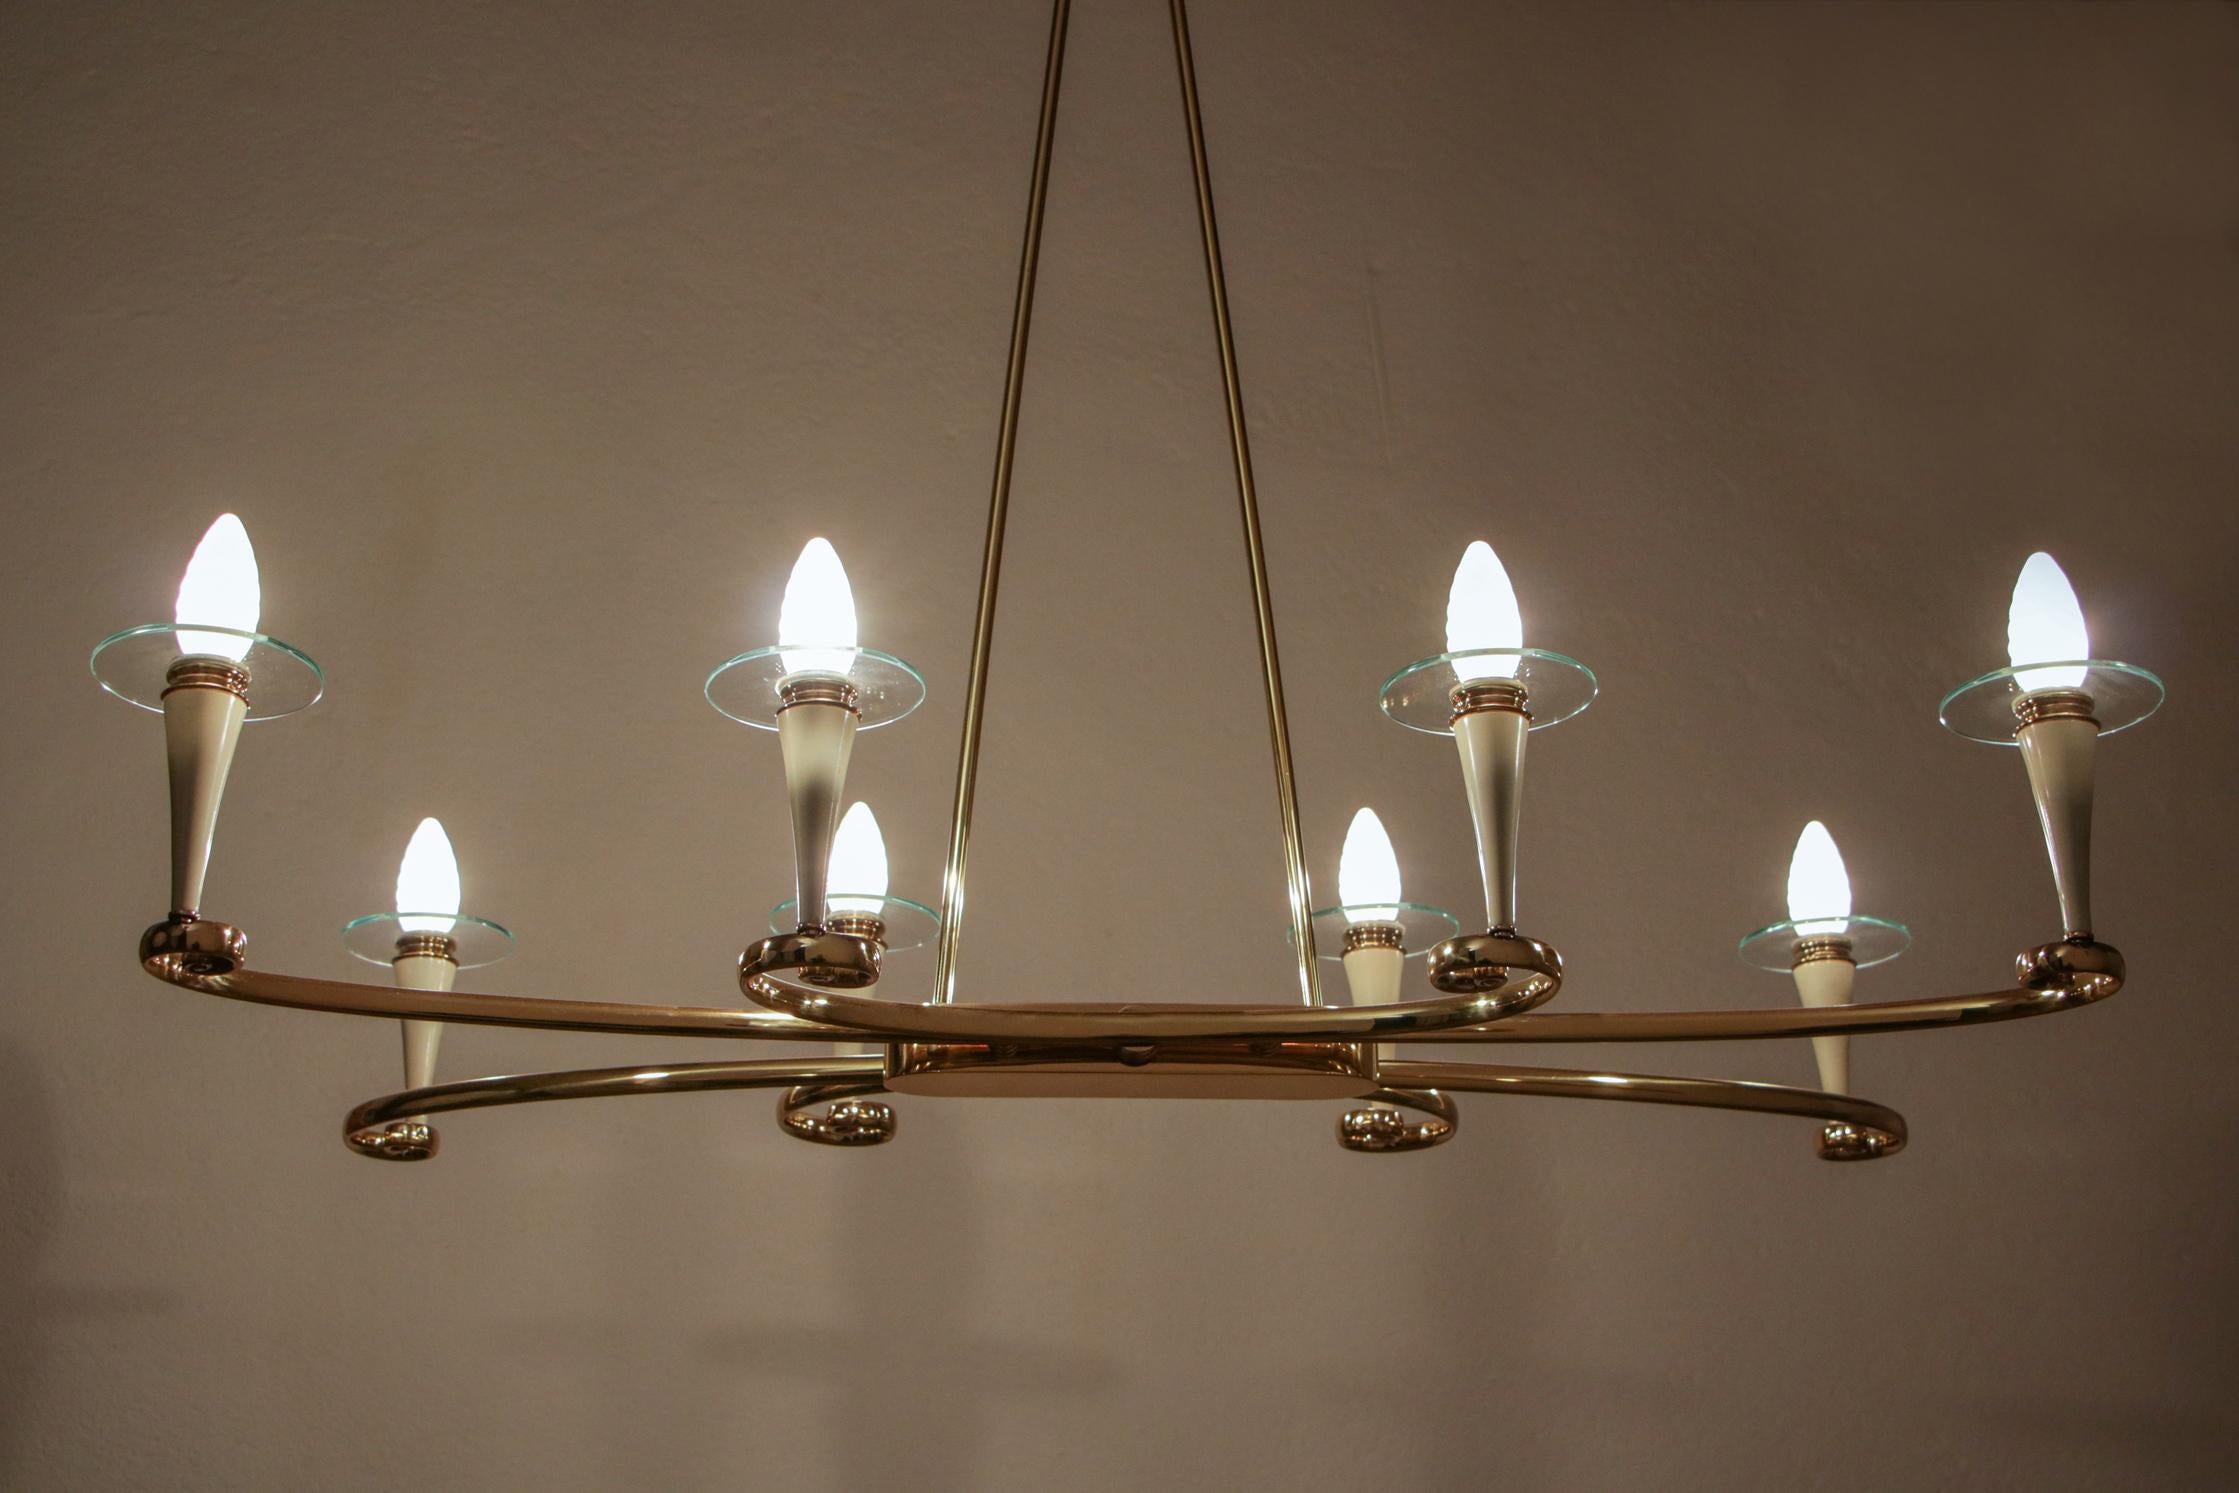 This wonderful Italian chandelier from the 1950s is a true masterpiece of design, featuring a clear-coated brass frame, ivory lacquered aluminum, glass, and eight E14 light bulbs. The main characteristics of this exquisite chandelier are refinement